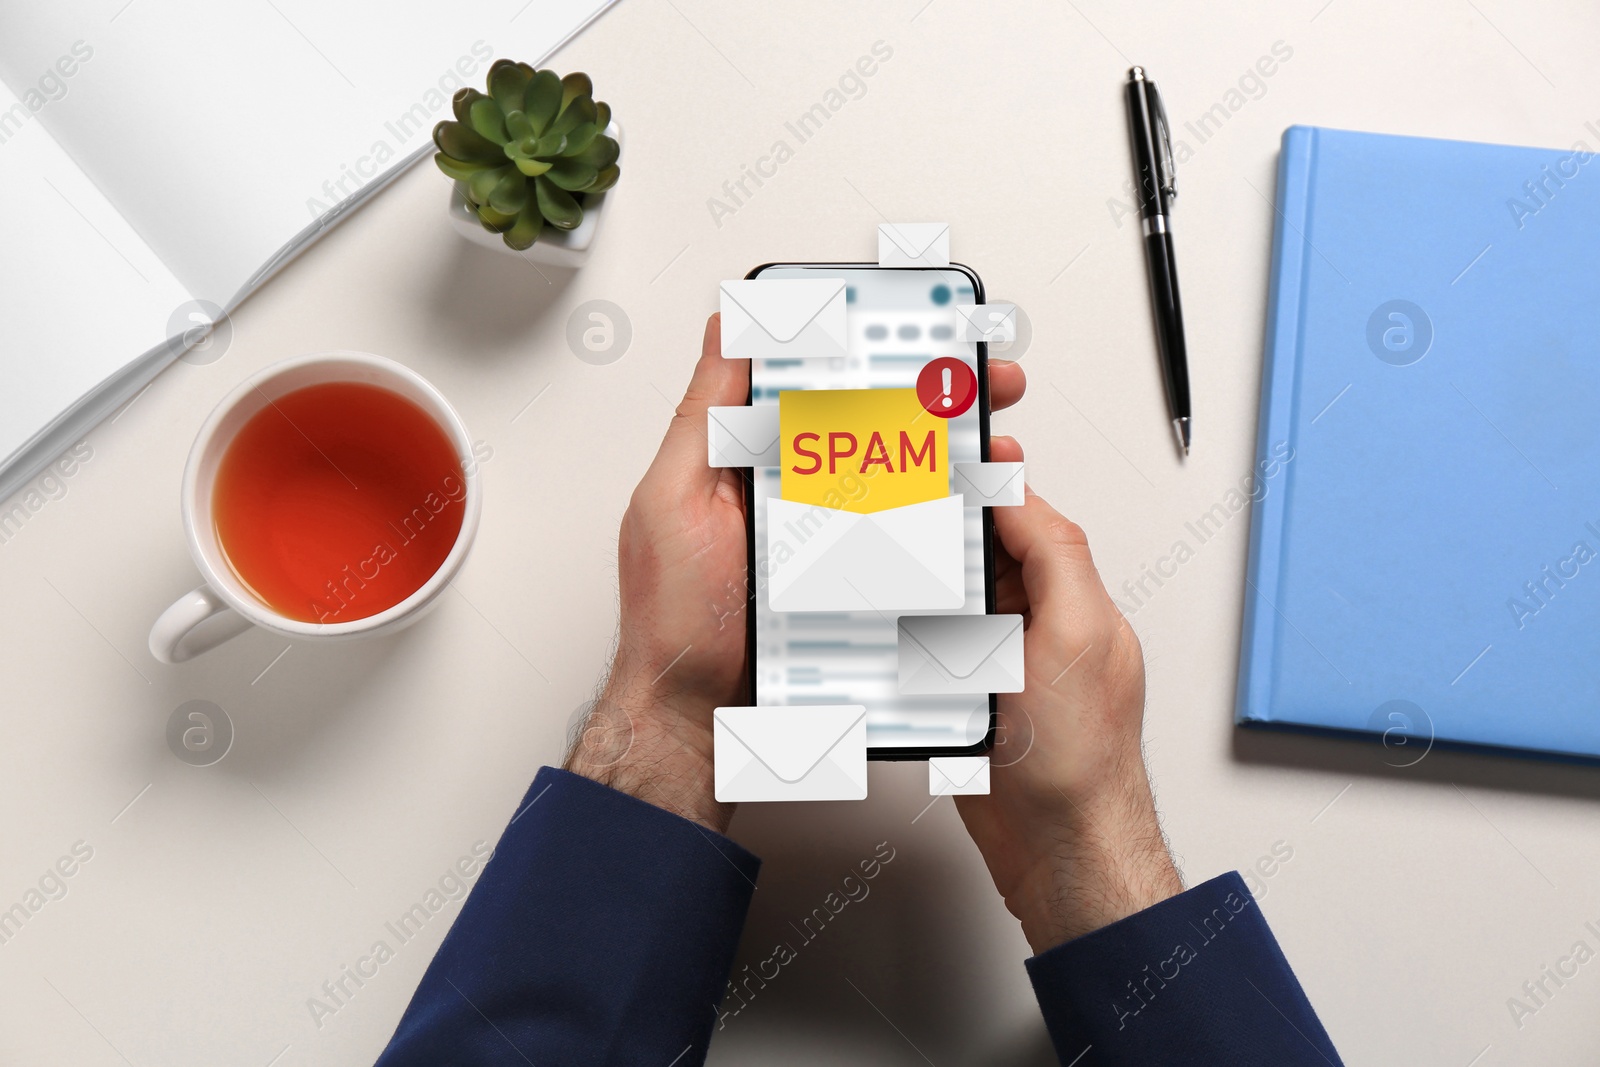 Image of Spam warning message, envelope illustrations popping out of device display. Man using email software on smartphone at table, top view